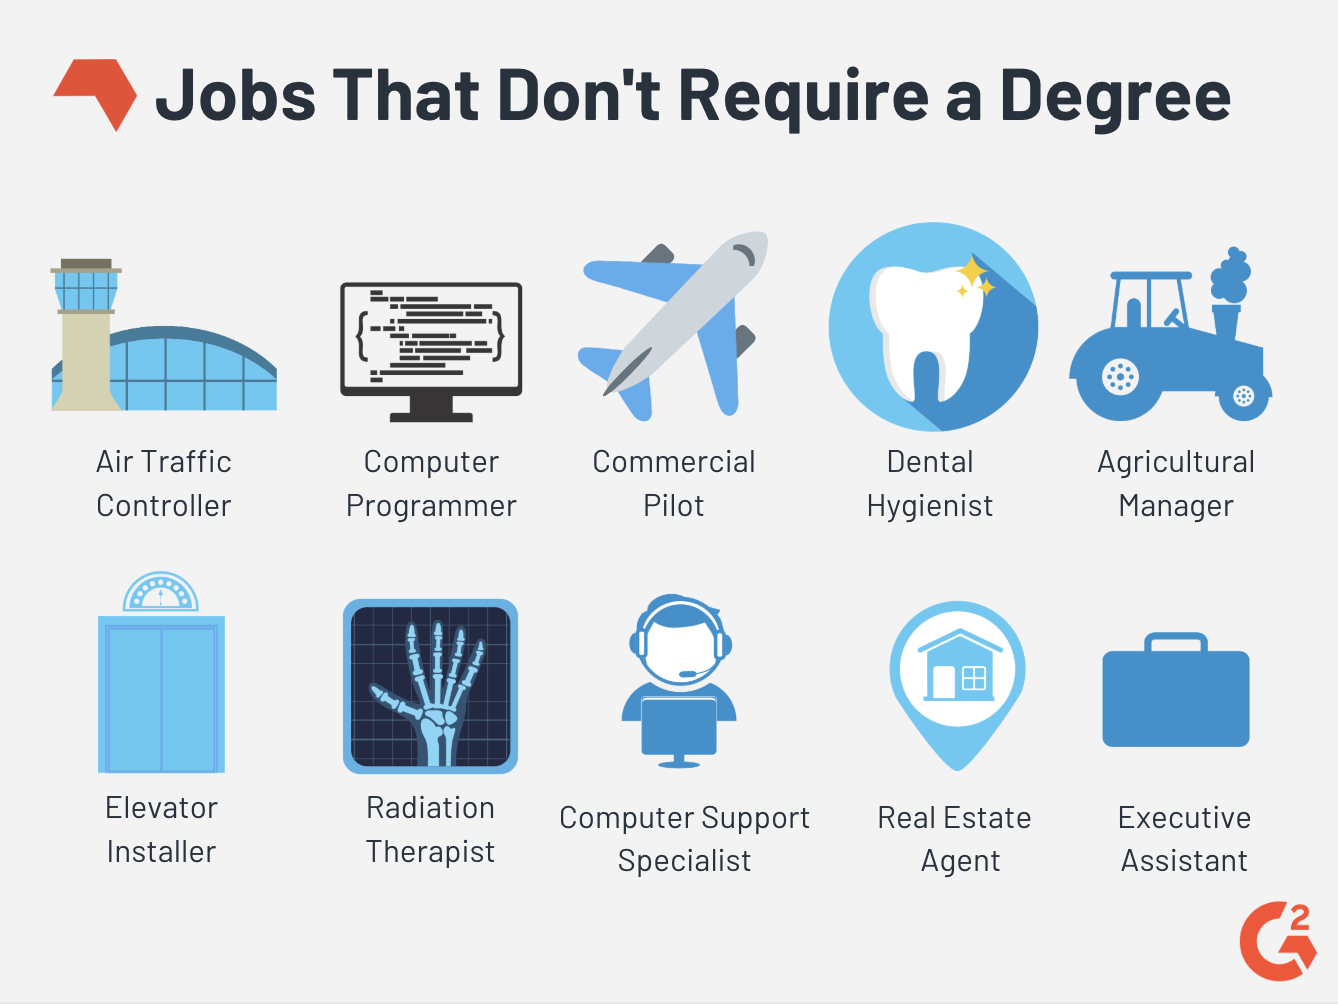 Government jobs do not require degree